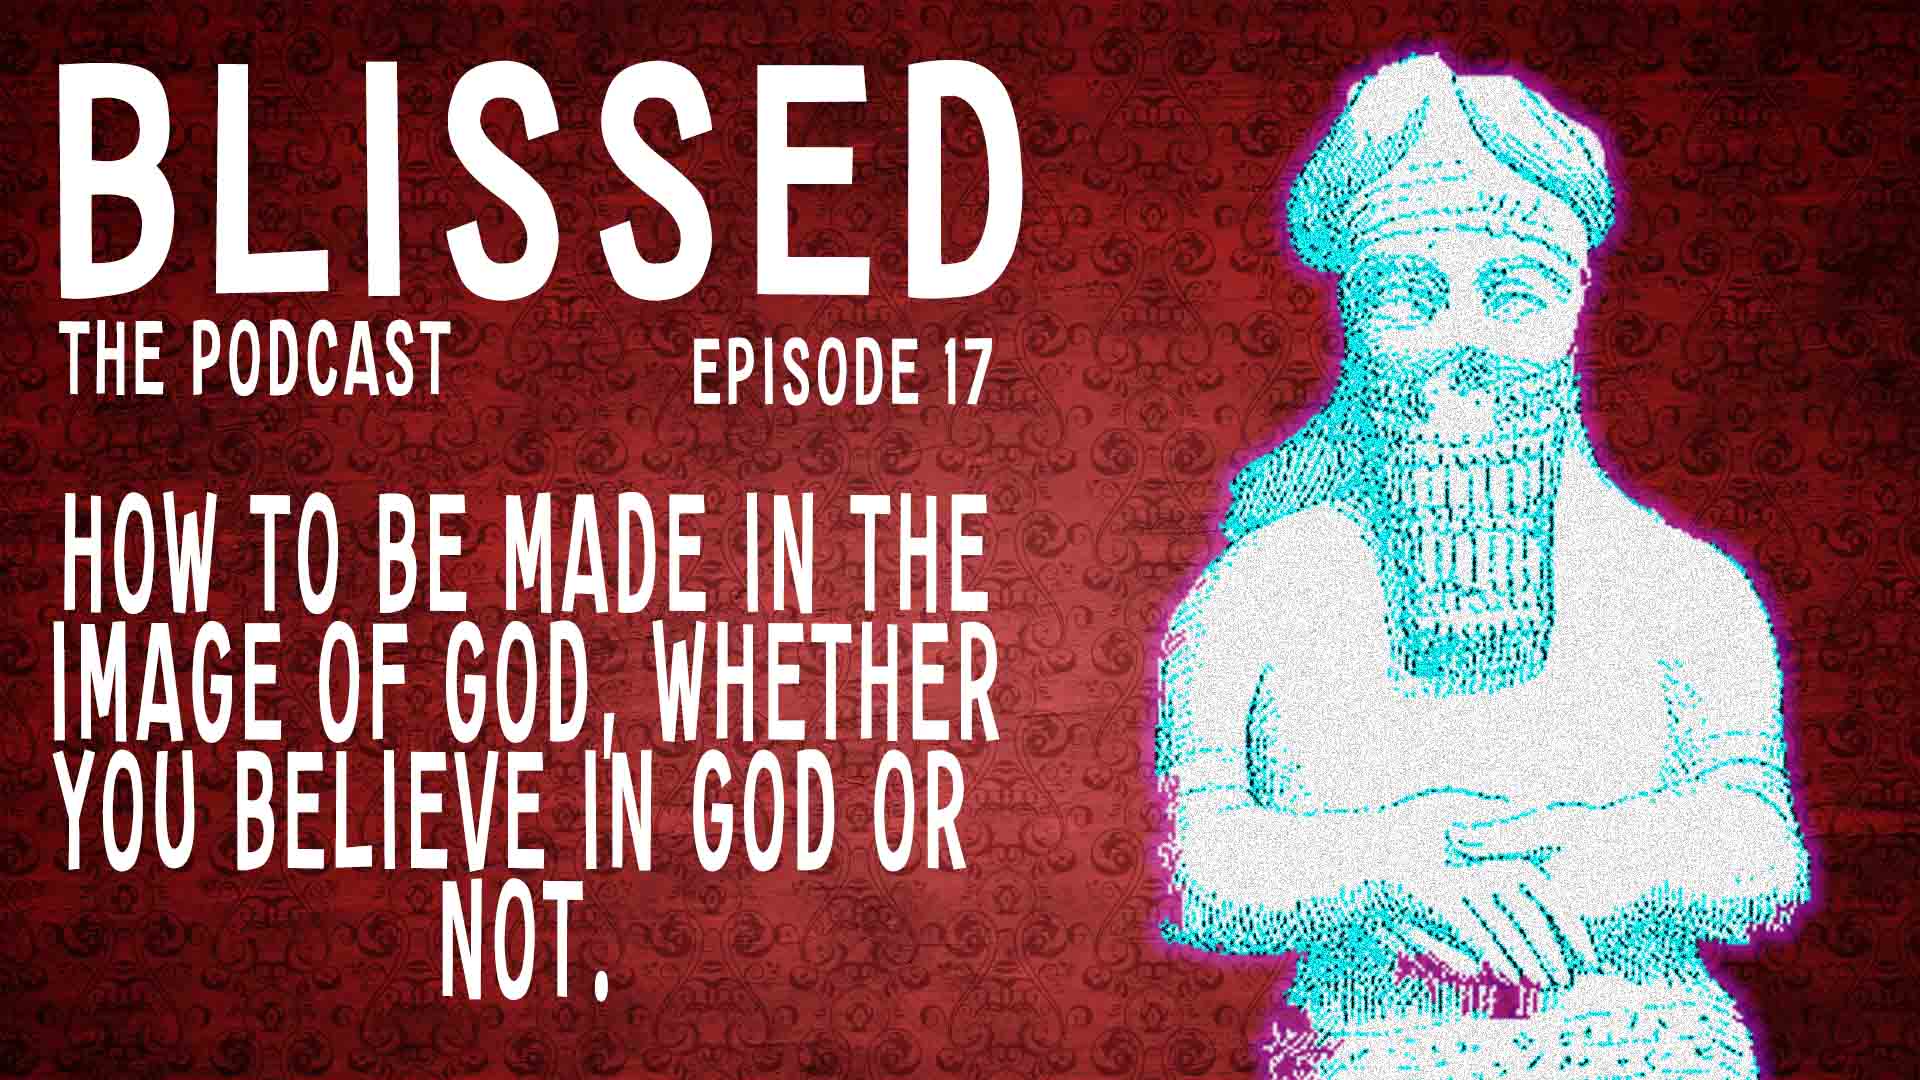 Blissed The Podcast - Episode 17: HOW TO BE MADE IN THE IMAGE OF GOD WHETHER YOU BELIEVE IN GOD OR NOT